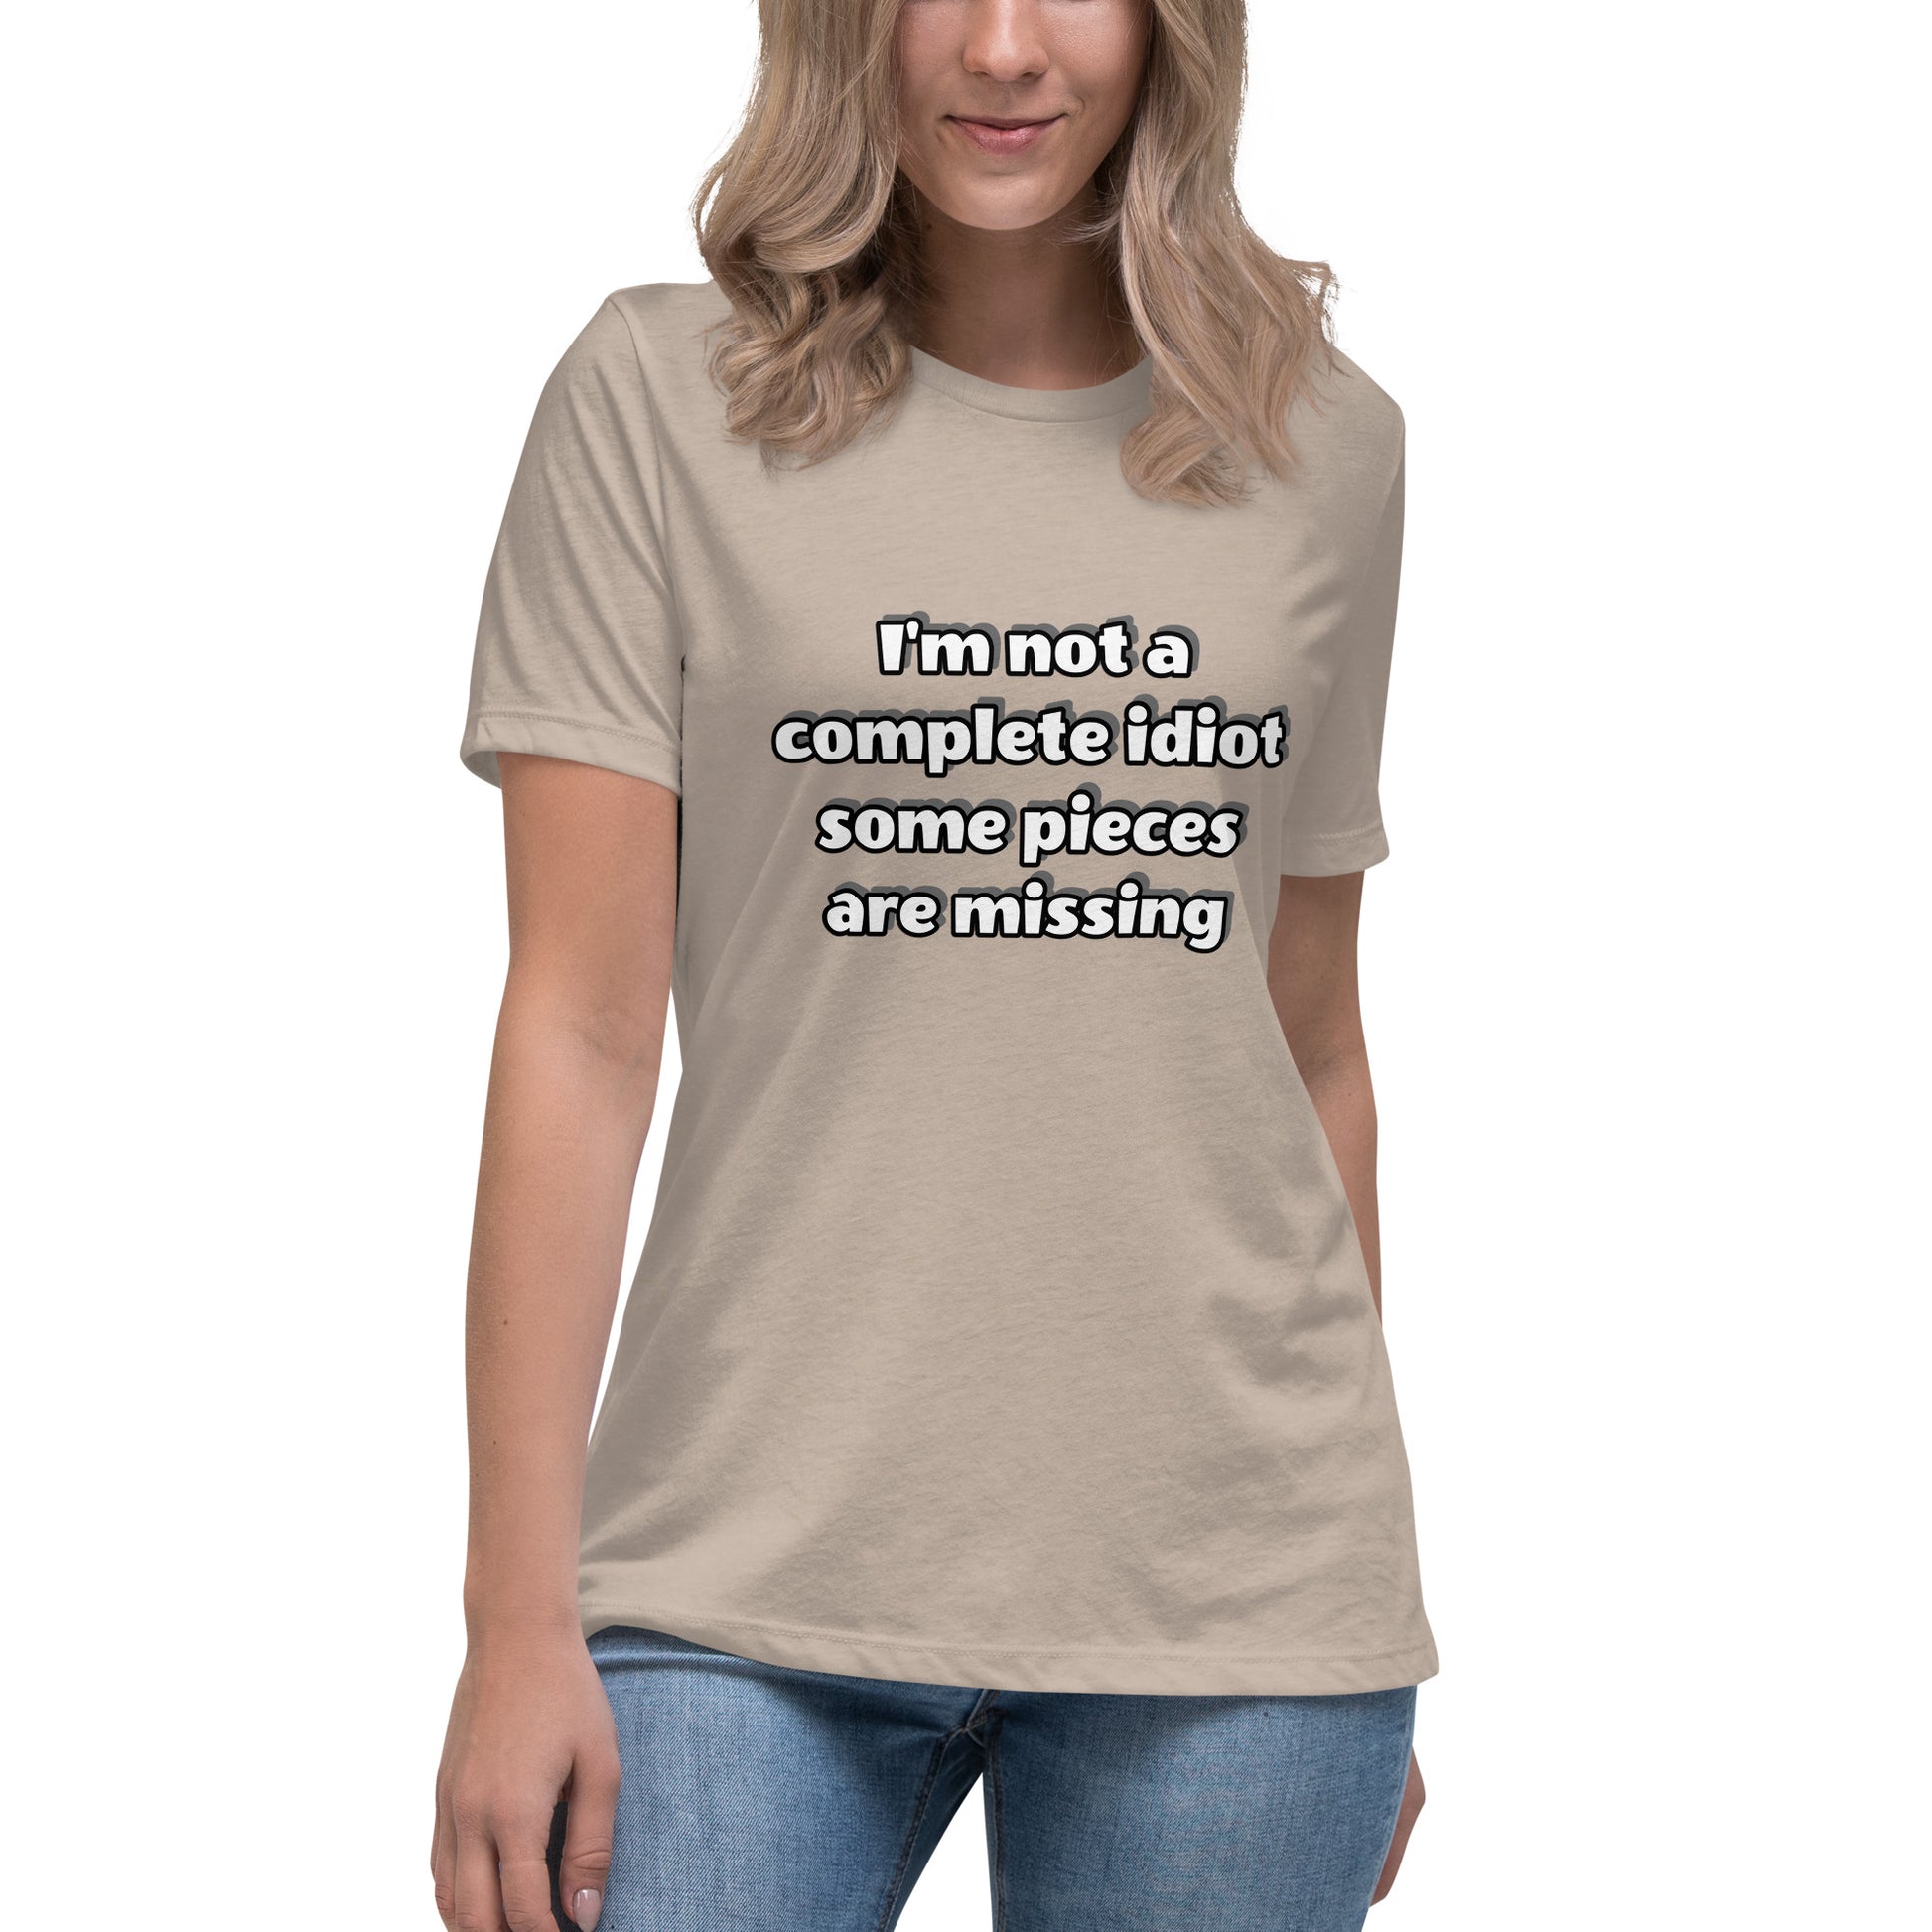 Women with stone t-shirt with text “I’m not a complete idiot, some pieces are missing”